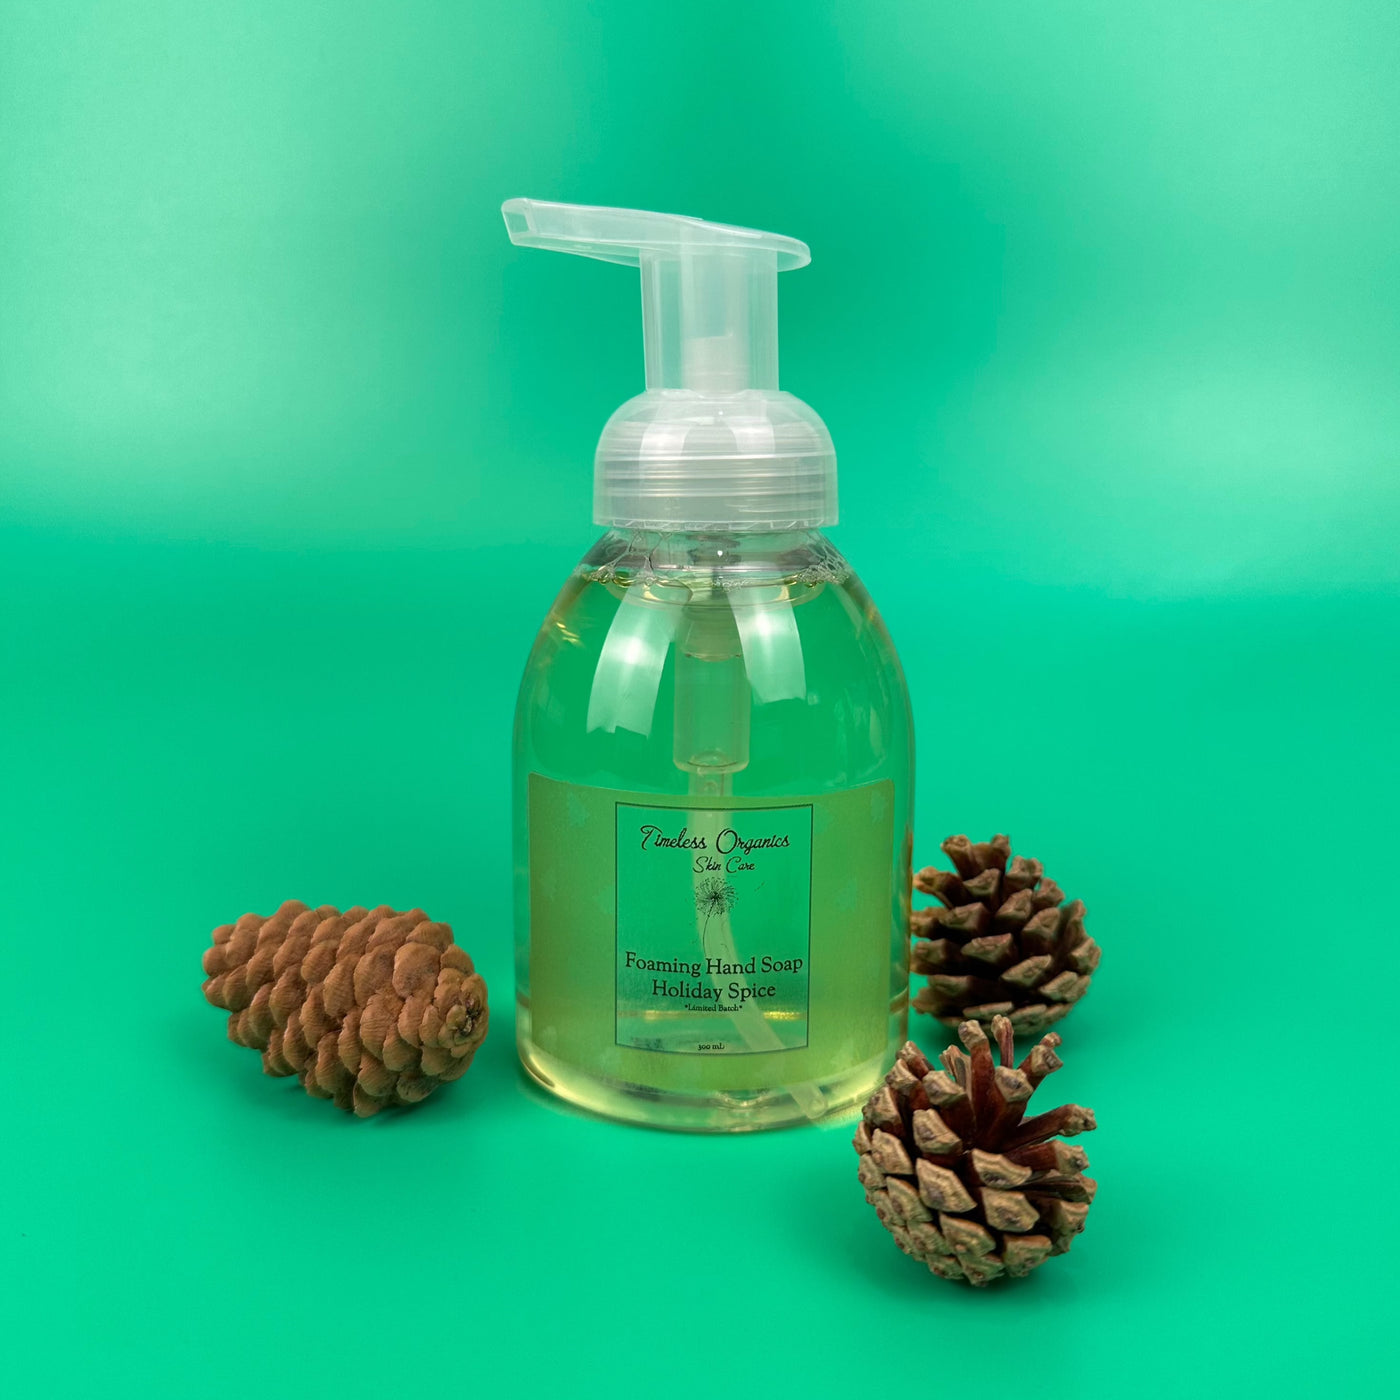 Holiday Spice Foaming Hand Soap